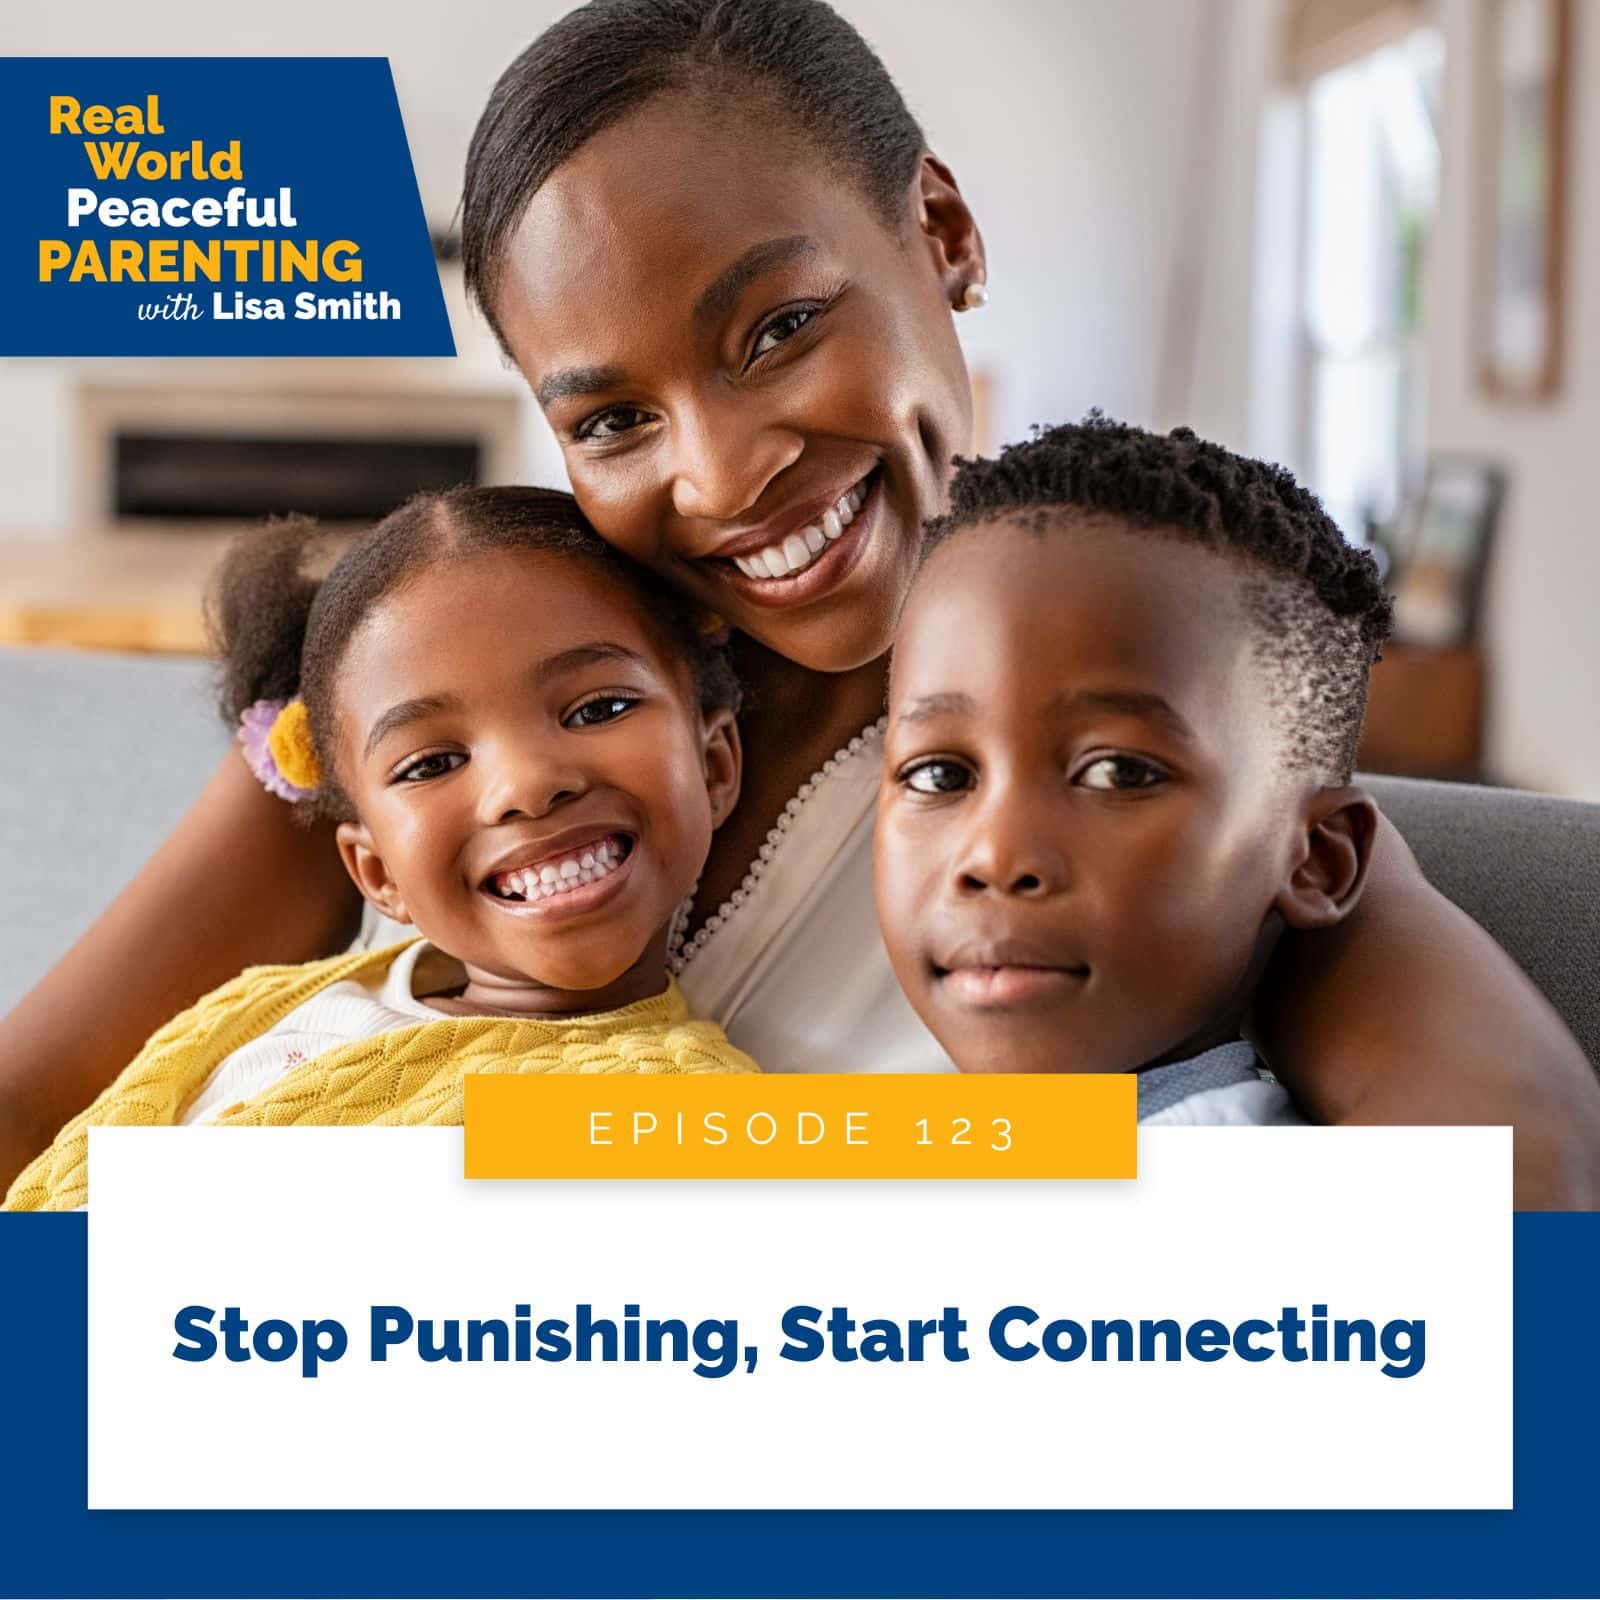 Real World Peaceful Parenting Lisa Smith | Stop Punishing, Start Connecting